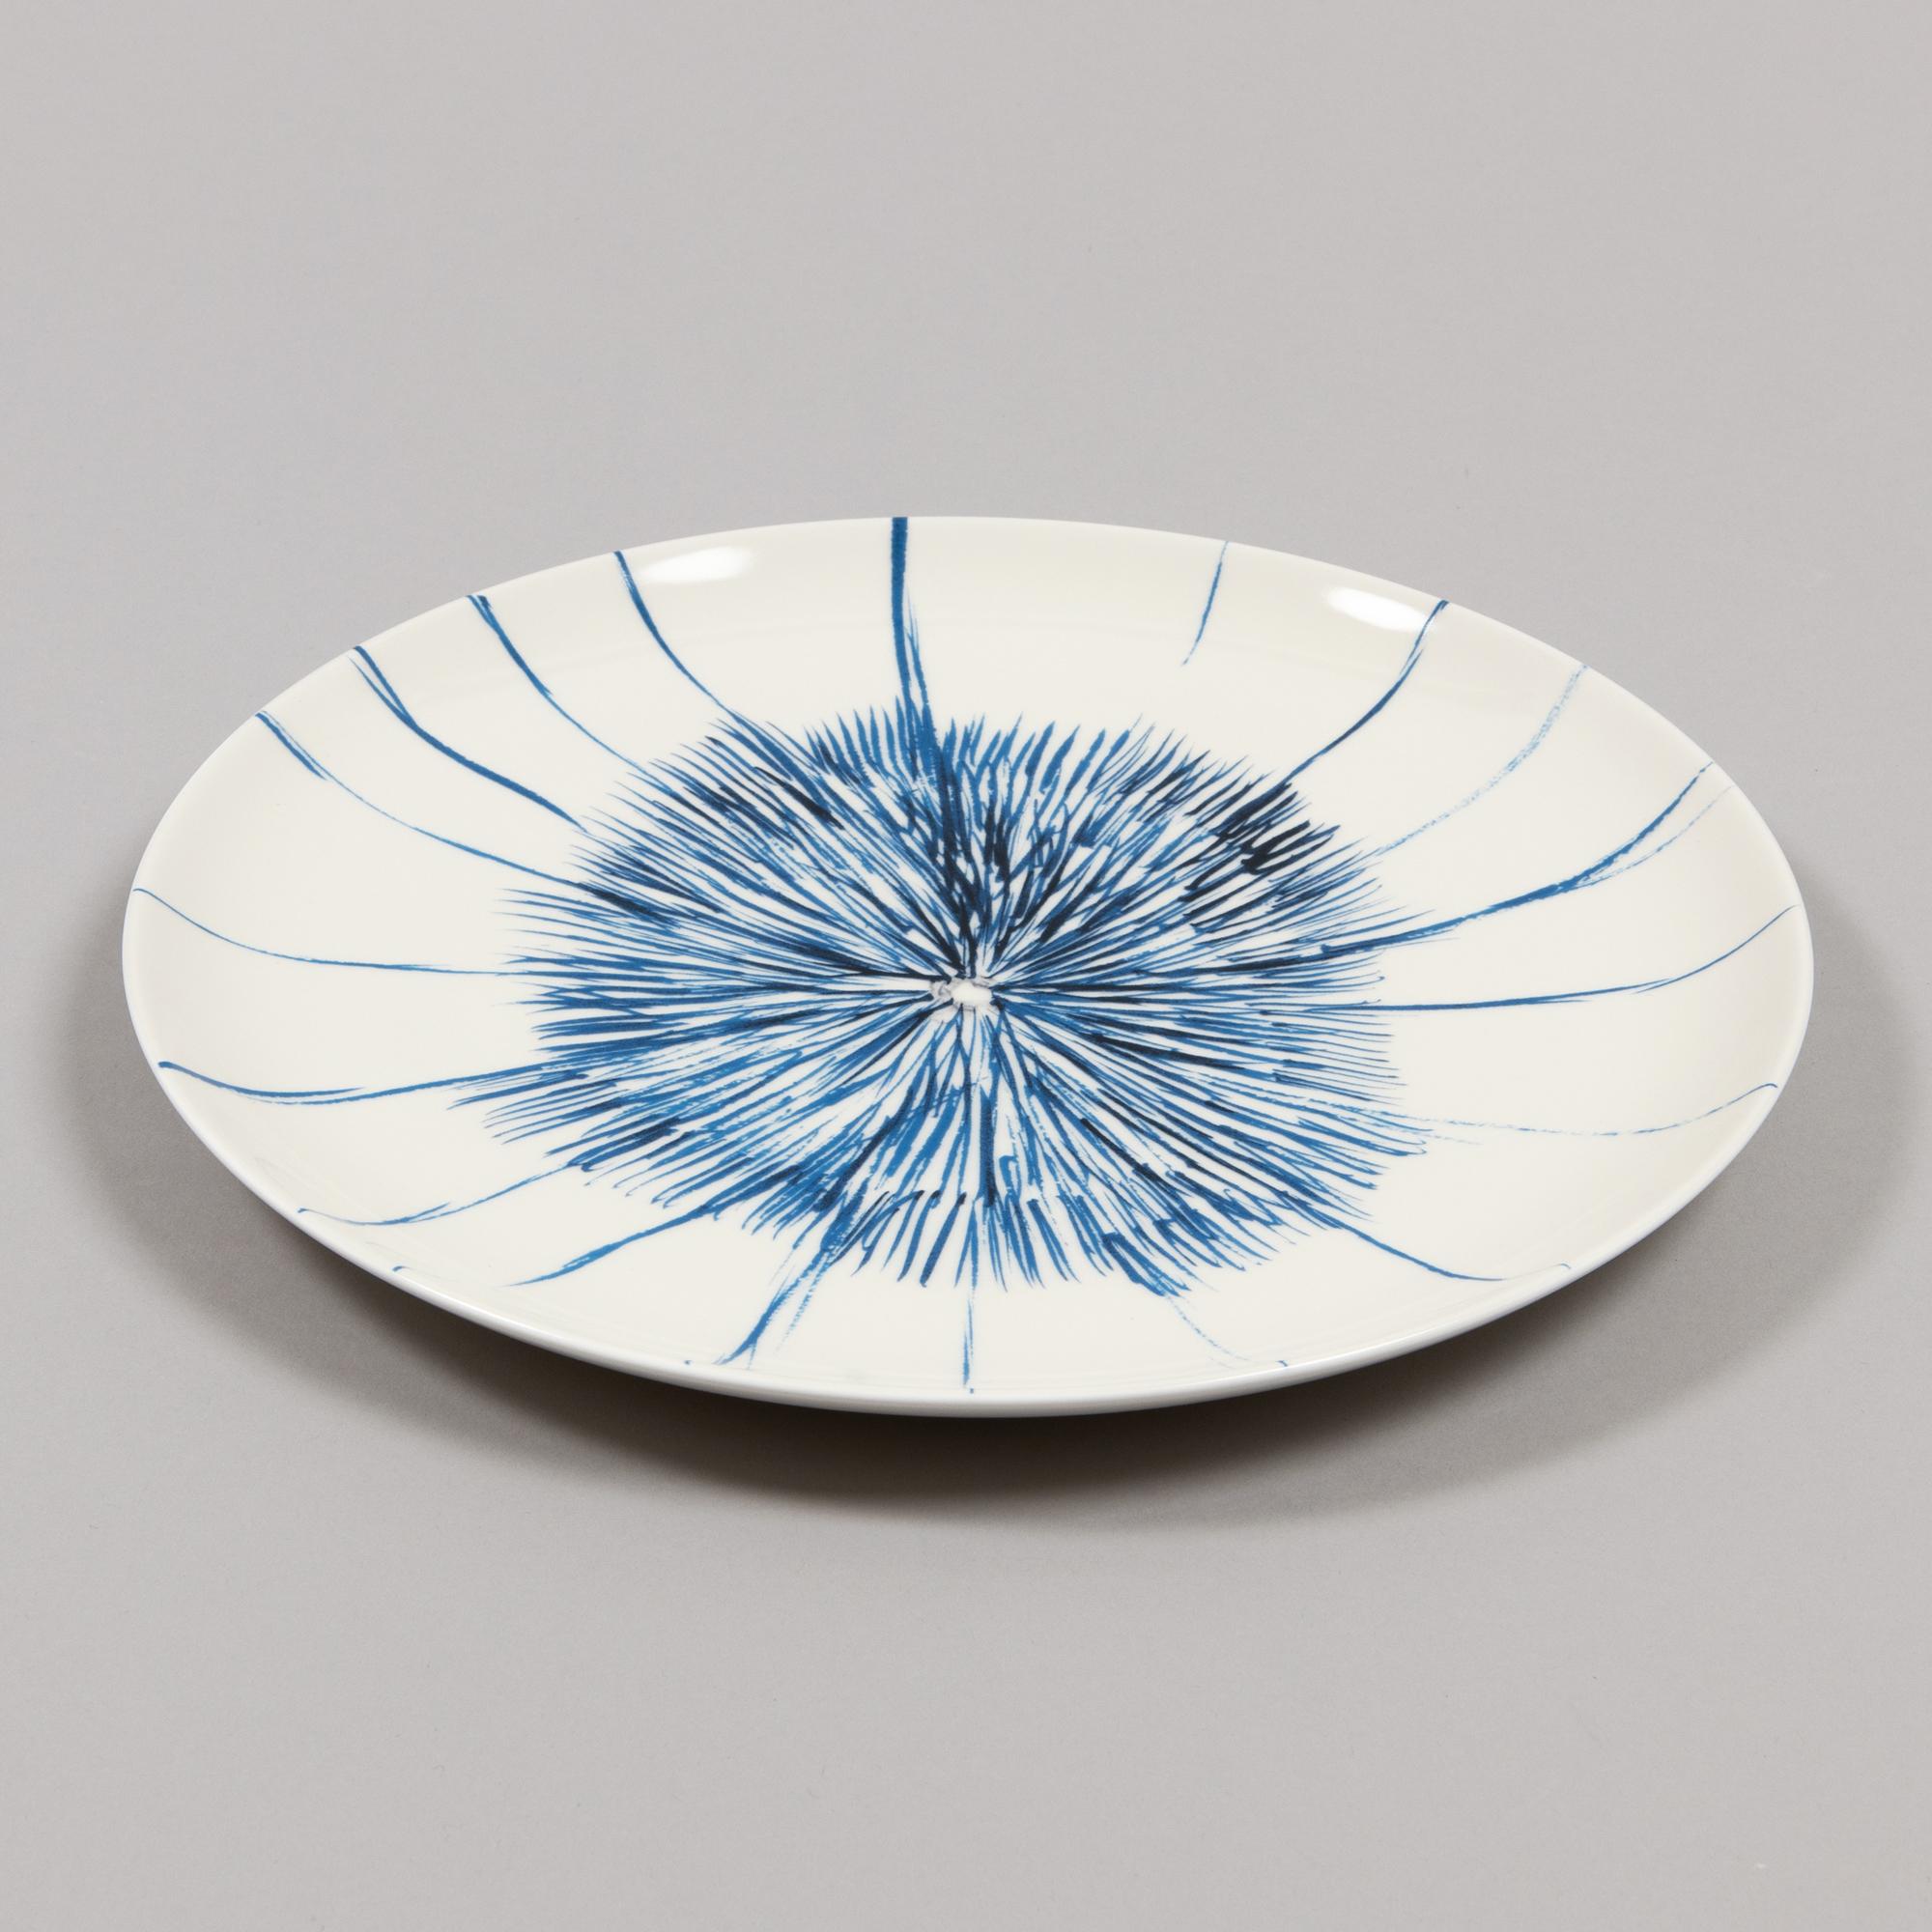 Louise Bourgeois, Je t'aime - Limited Edition Porcelain Plate, Abstract Art For Sale 3